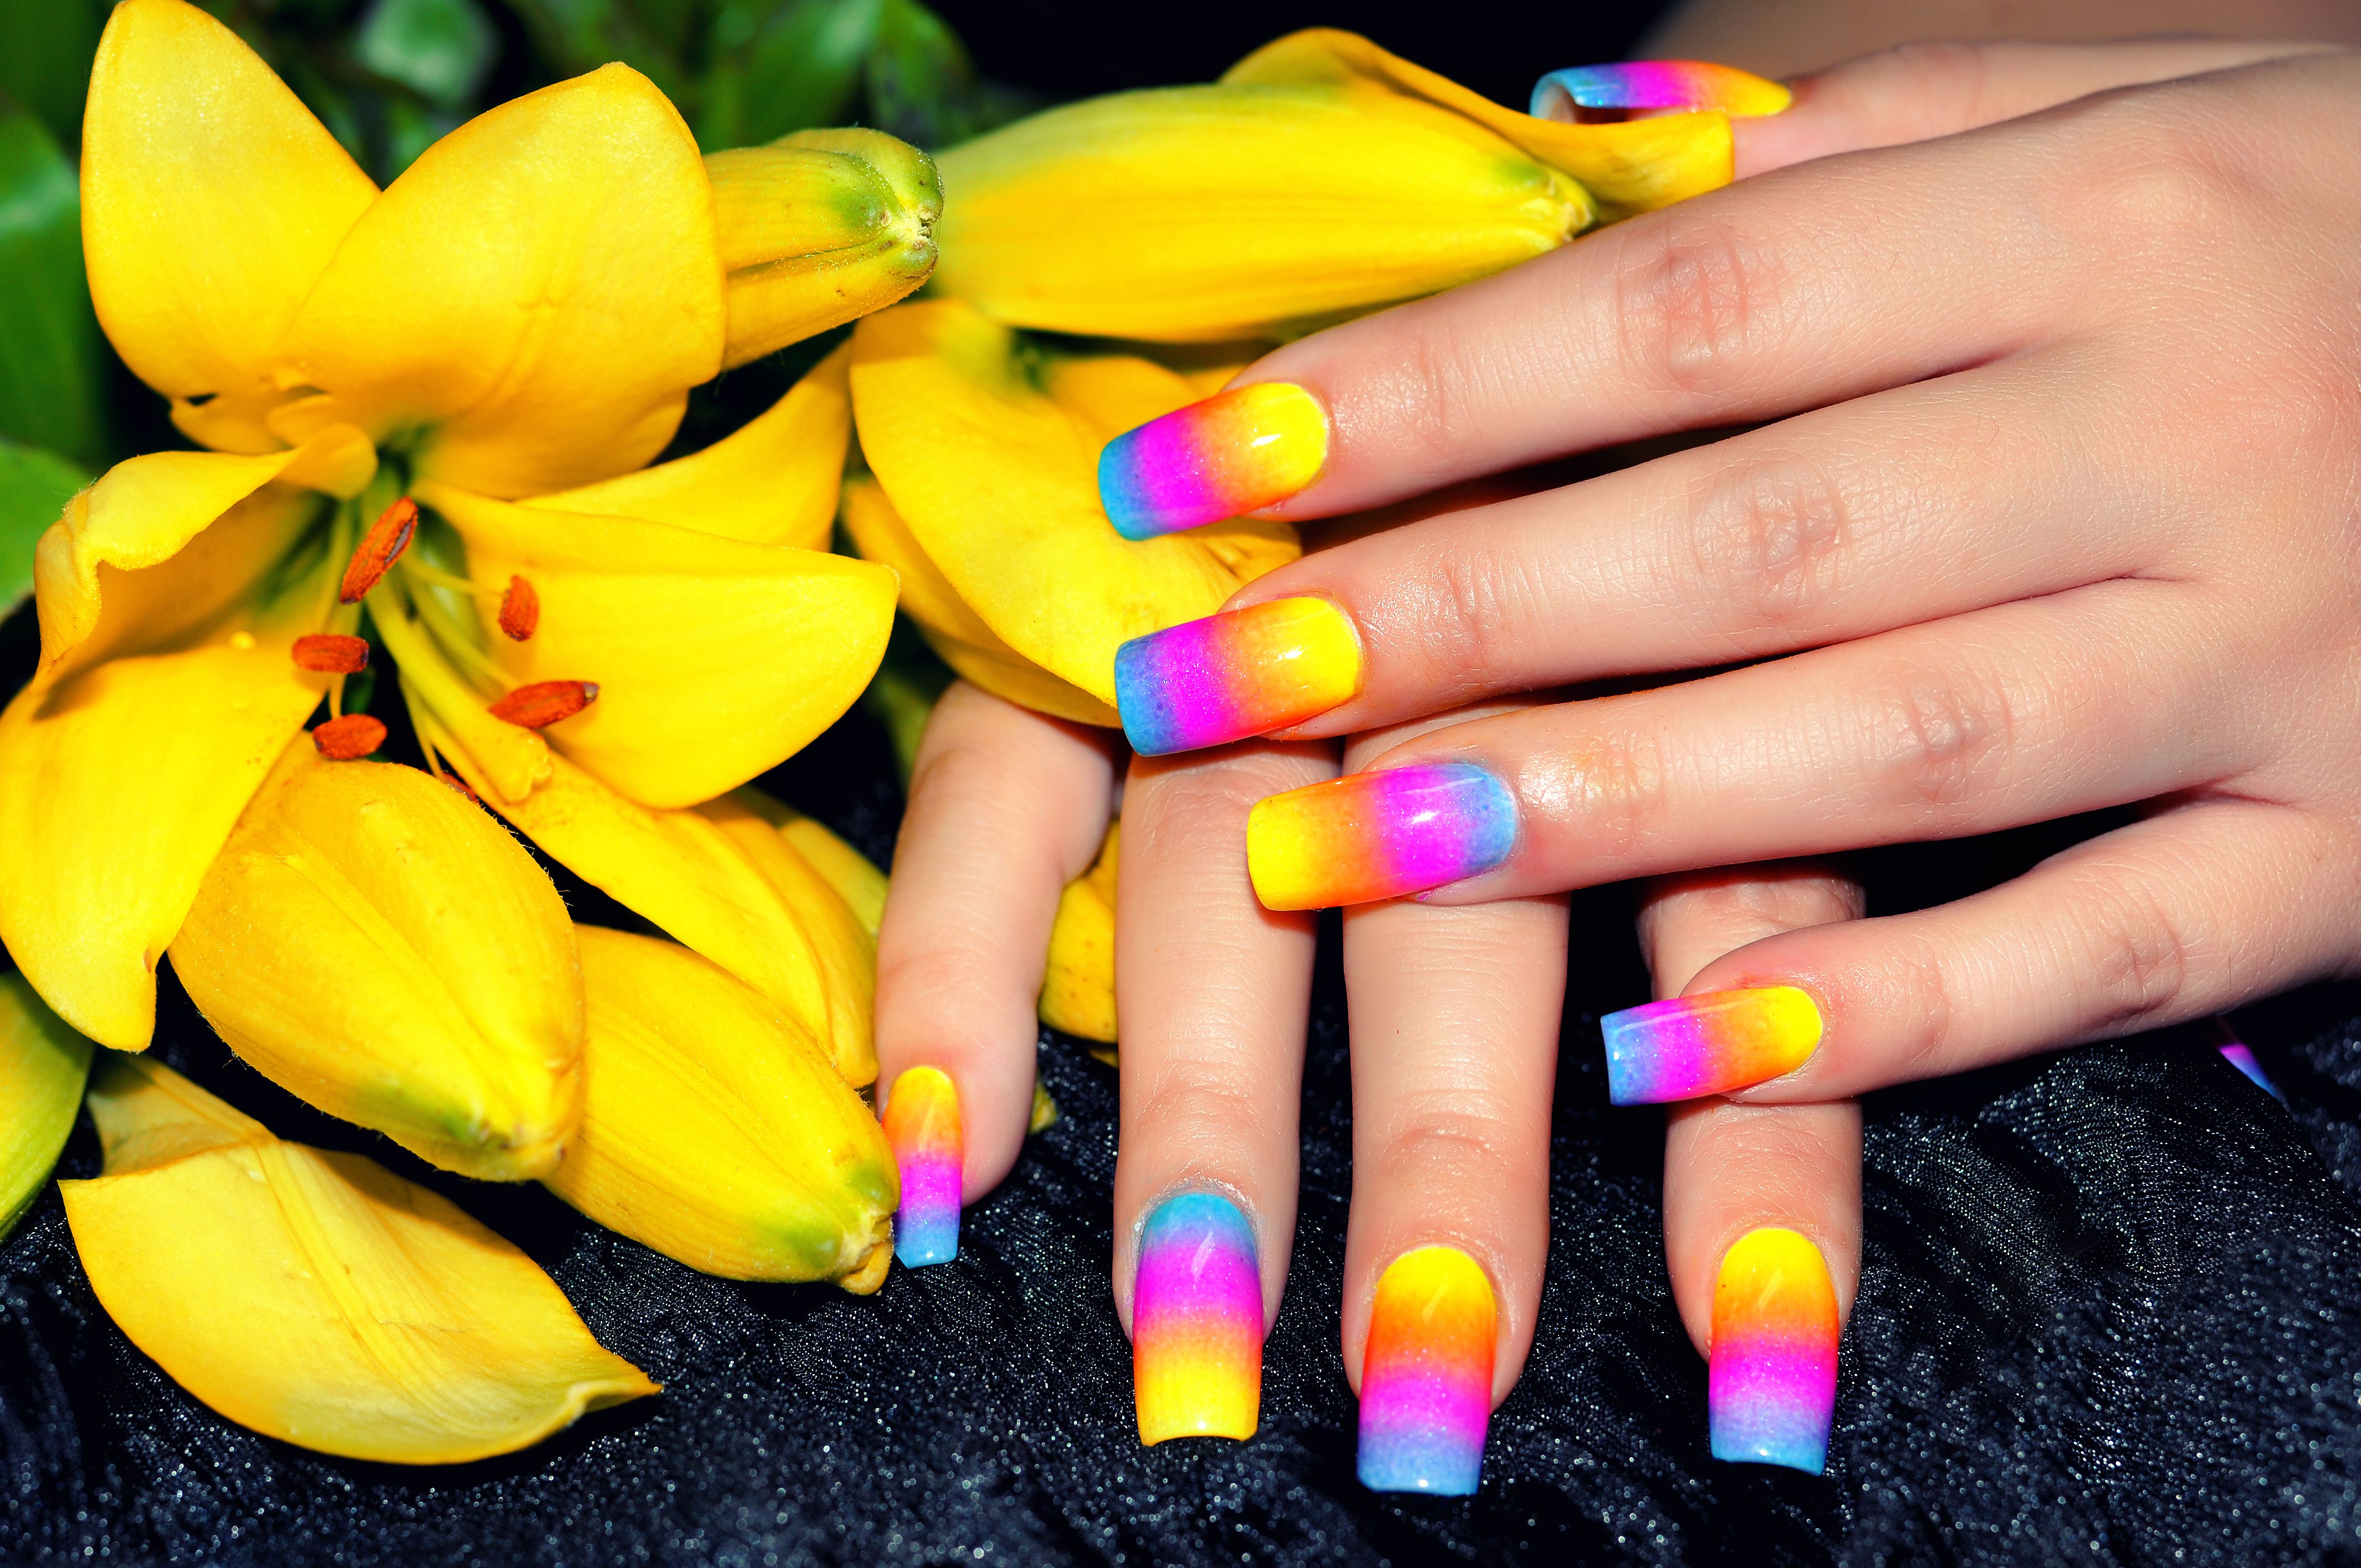 Rainbow-colored nails and yellow flowers. | Source: Getty Images